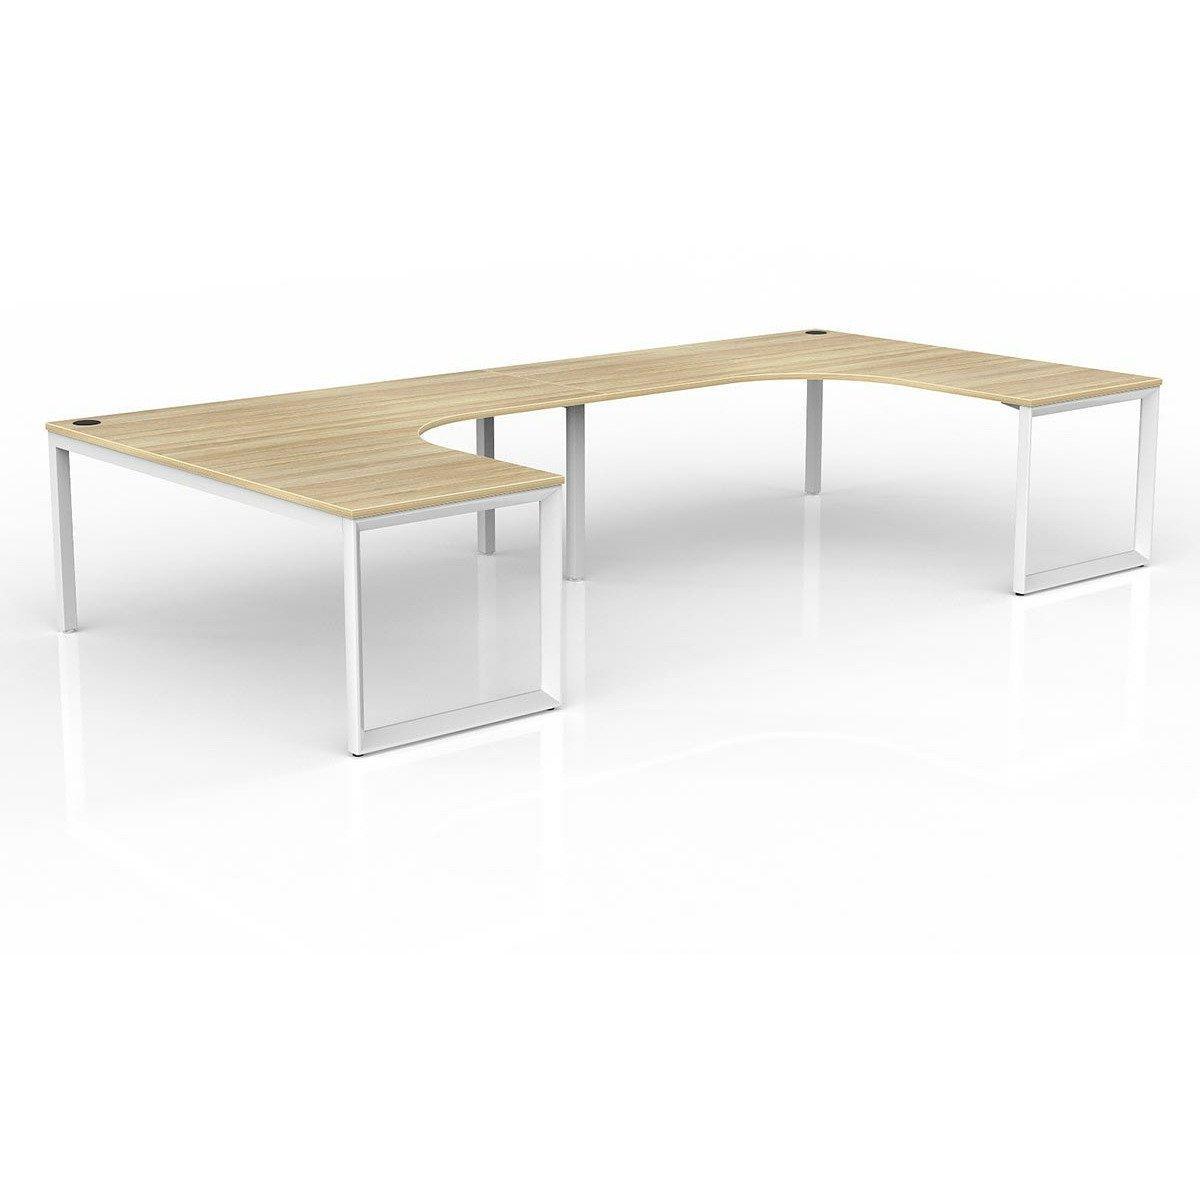 Anvil 2 Persons Corner Workstation - Office Furniture Company 